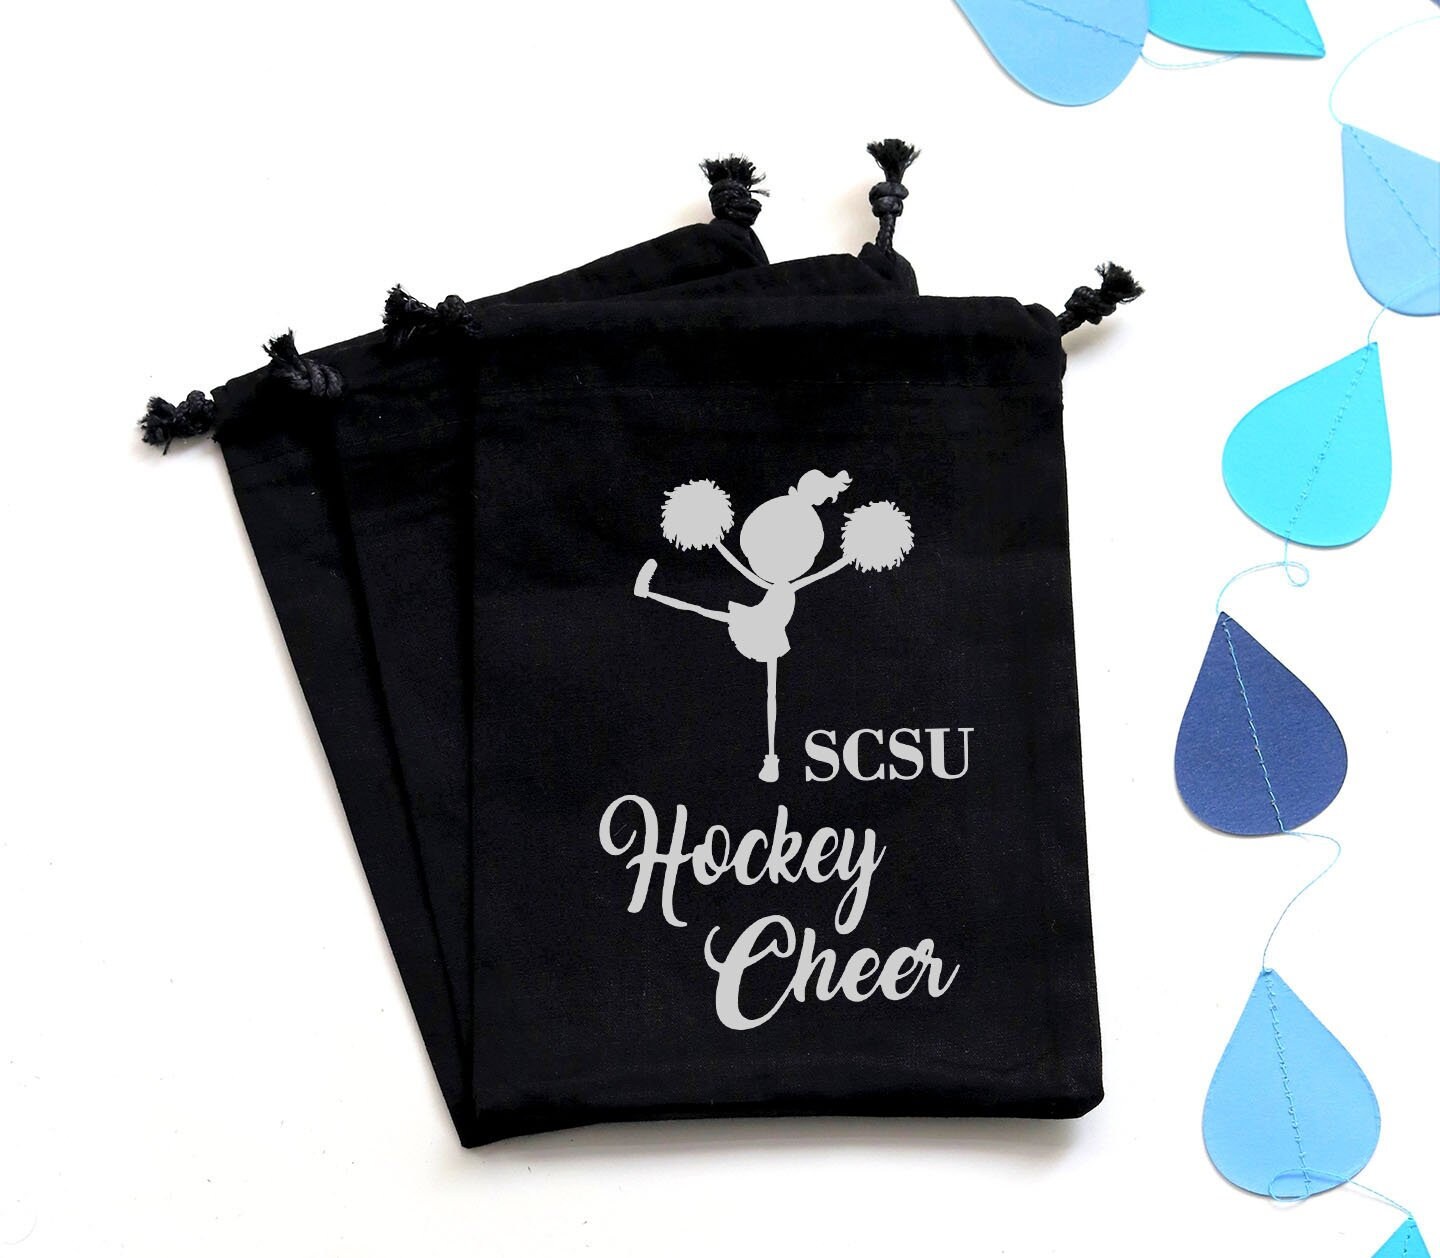 Cheerleading Gifts for Girls 8-10, Small Gift Ideas for Cheerleaders, Fun  Cheer Themed Tumbler for Teens, Cheerleader Gifts for Girls 12-14. 